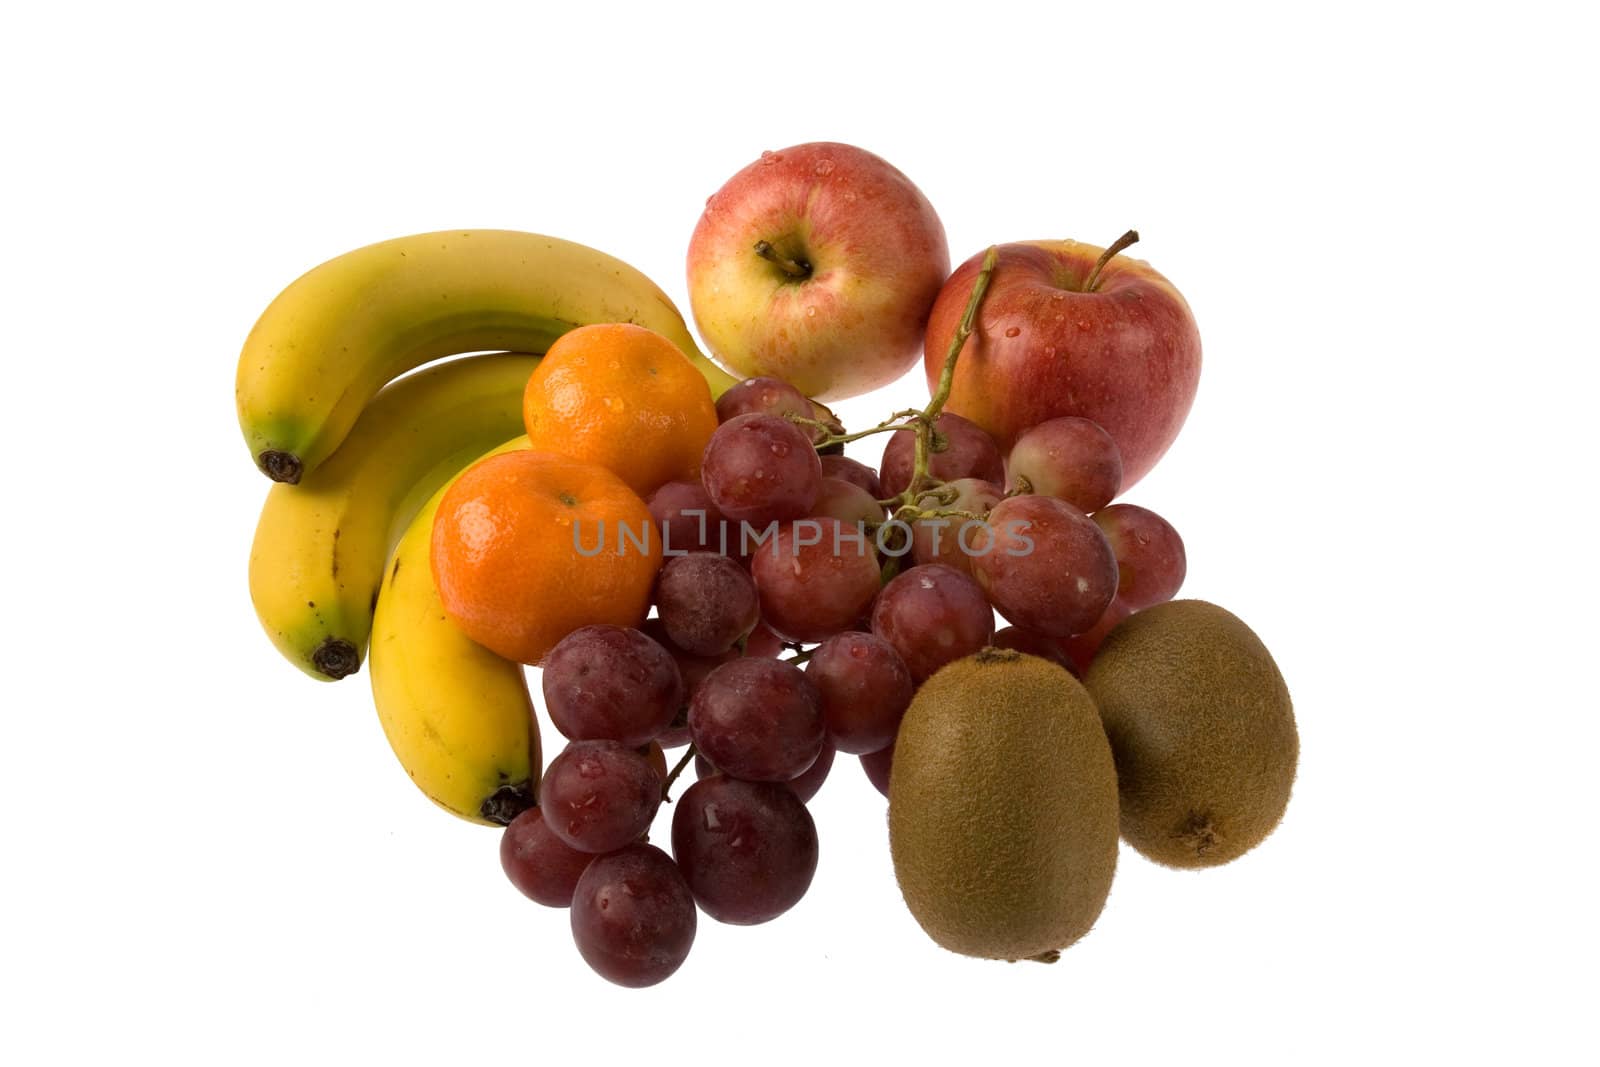 Bananas, tangerines, grapes, apples and kiwis isolated against a white background